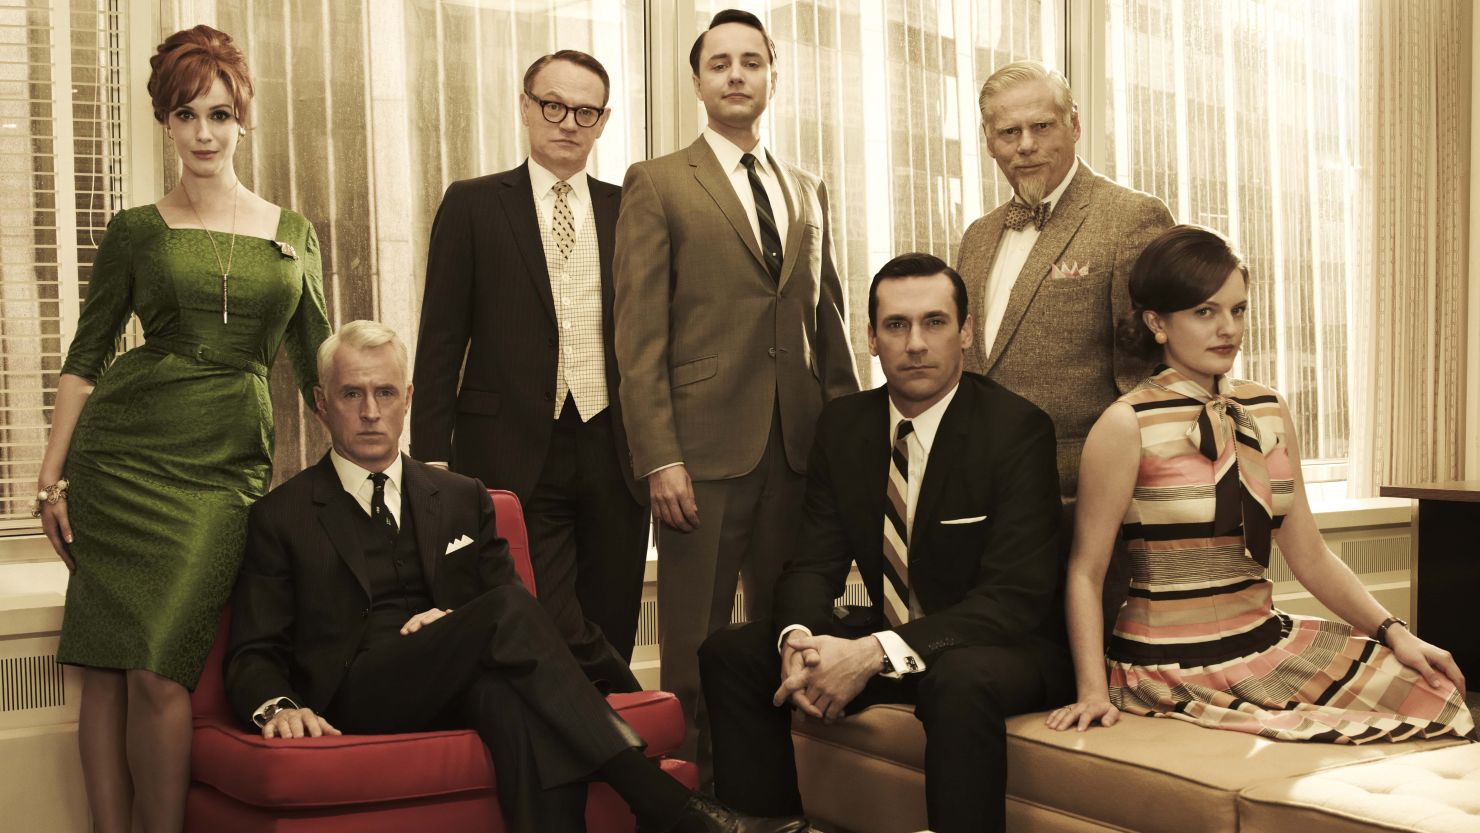 The hit AMC period drama 'Mad Men' reflects the stereotypes associated with the secretary of the 1960s.